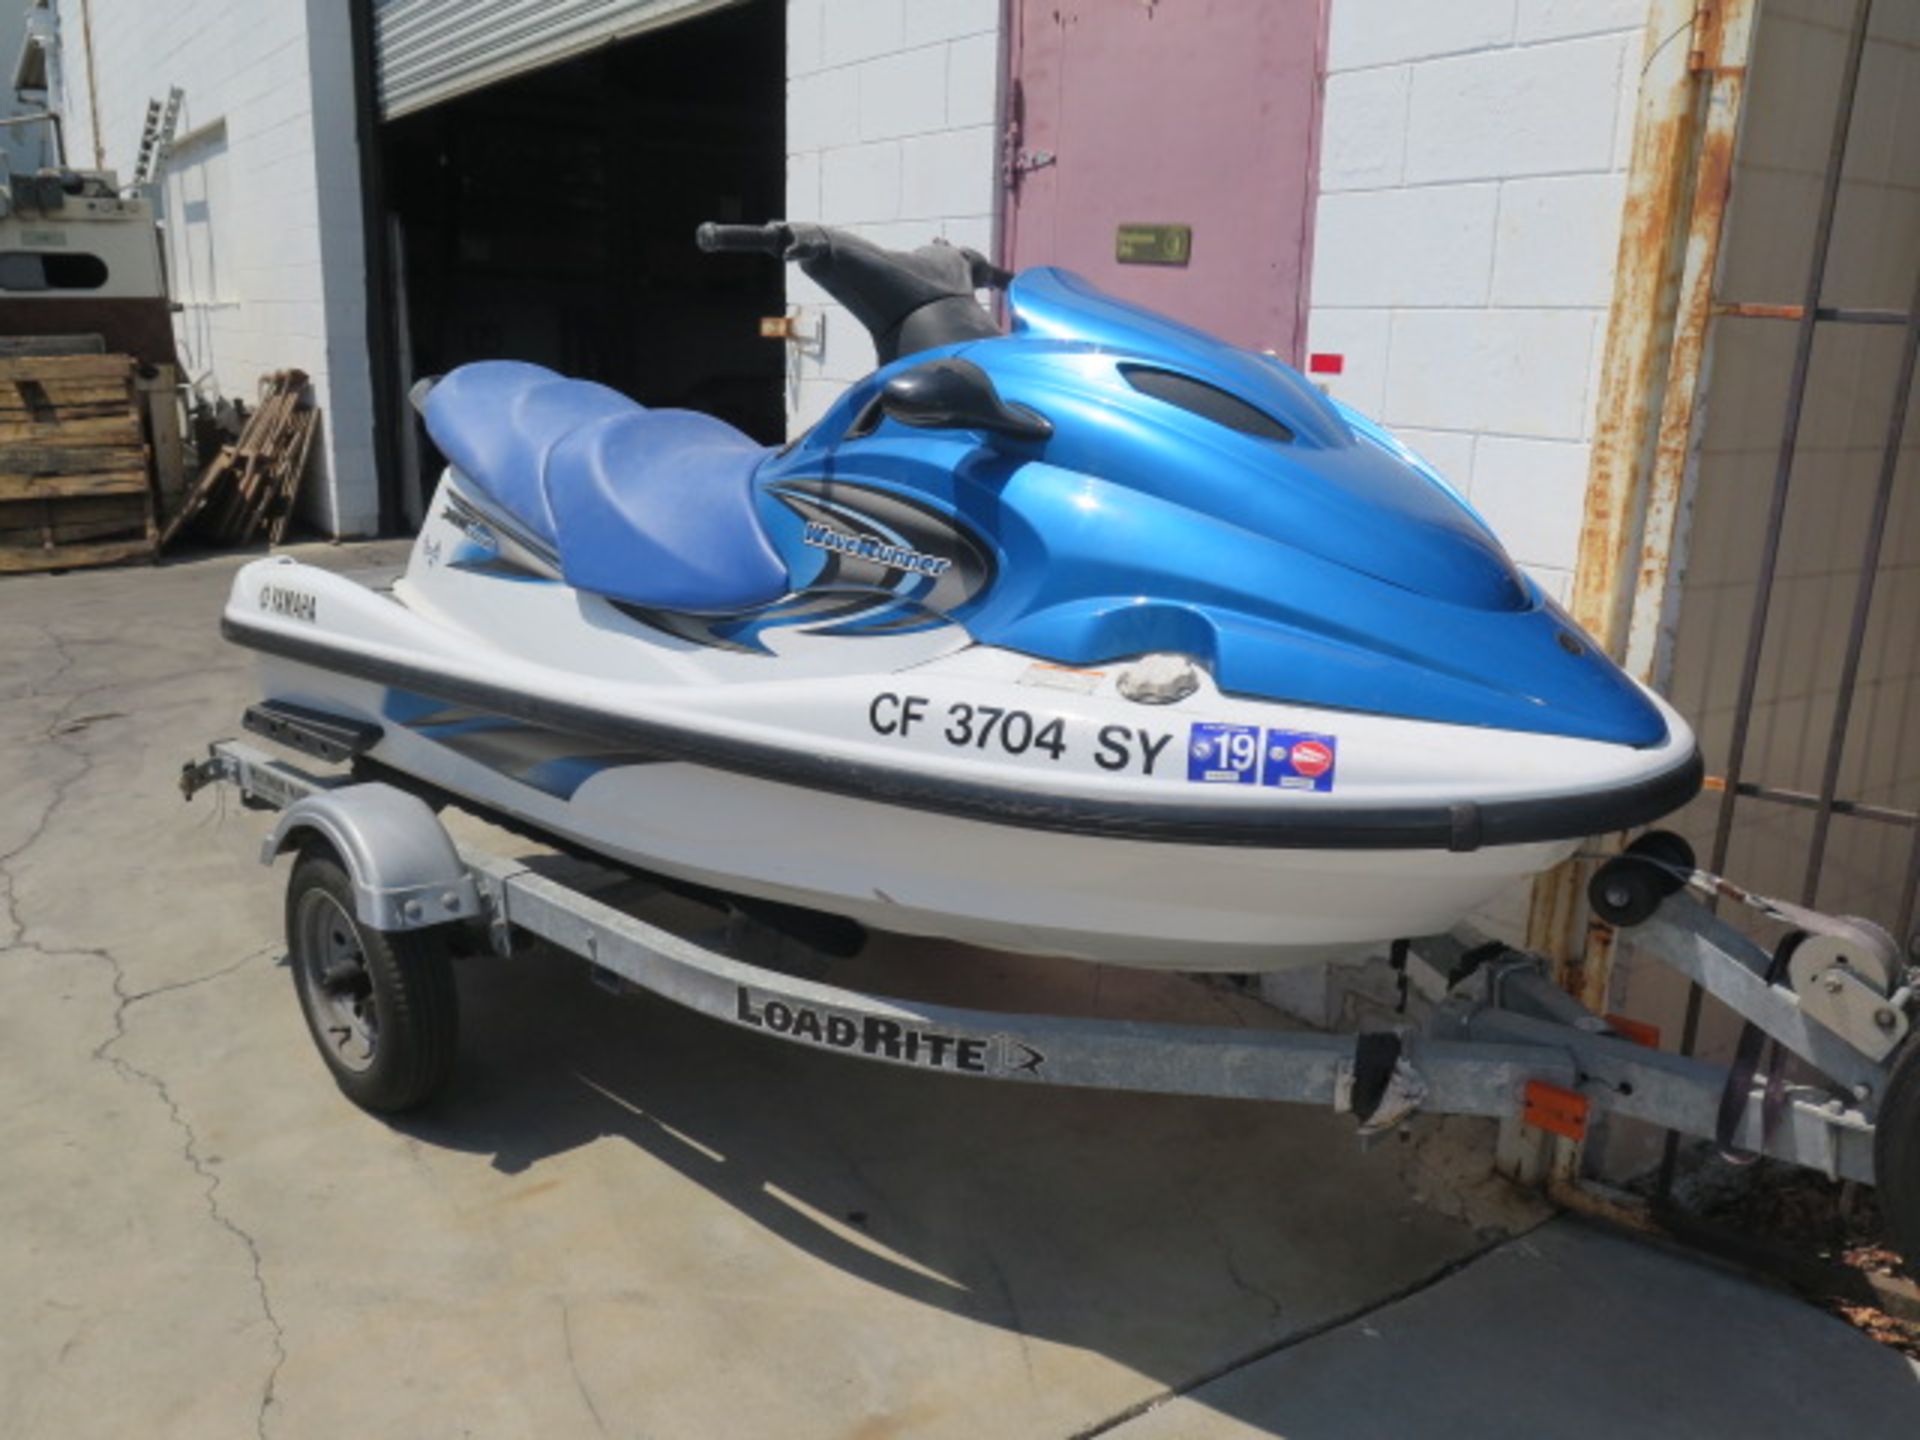 2004 Yamaha XLT800 Wave Runner Personal Watercraft w/ Gas Engine, Jet Outdrive, Trailer, SOLD AS IS